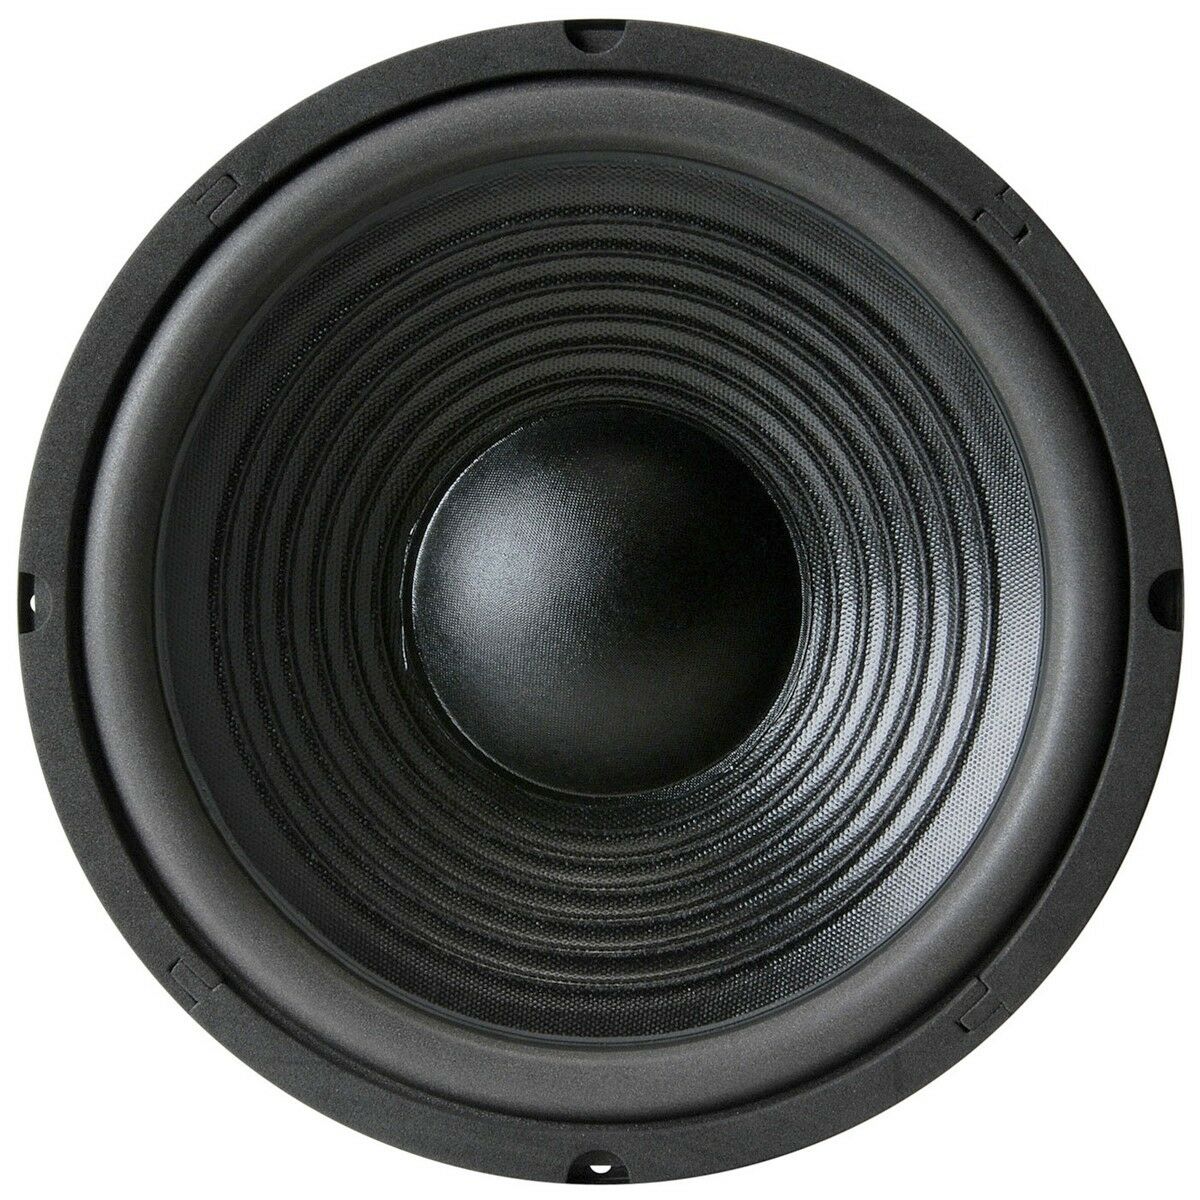 New 10" Woofer Speaker.home Audio 8ohm Bass Replacement Sound.220w.10inch.stereo